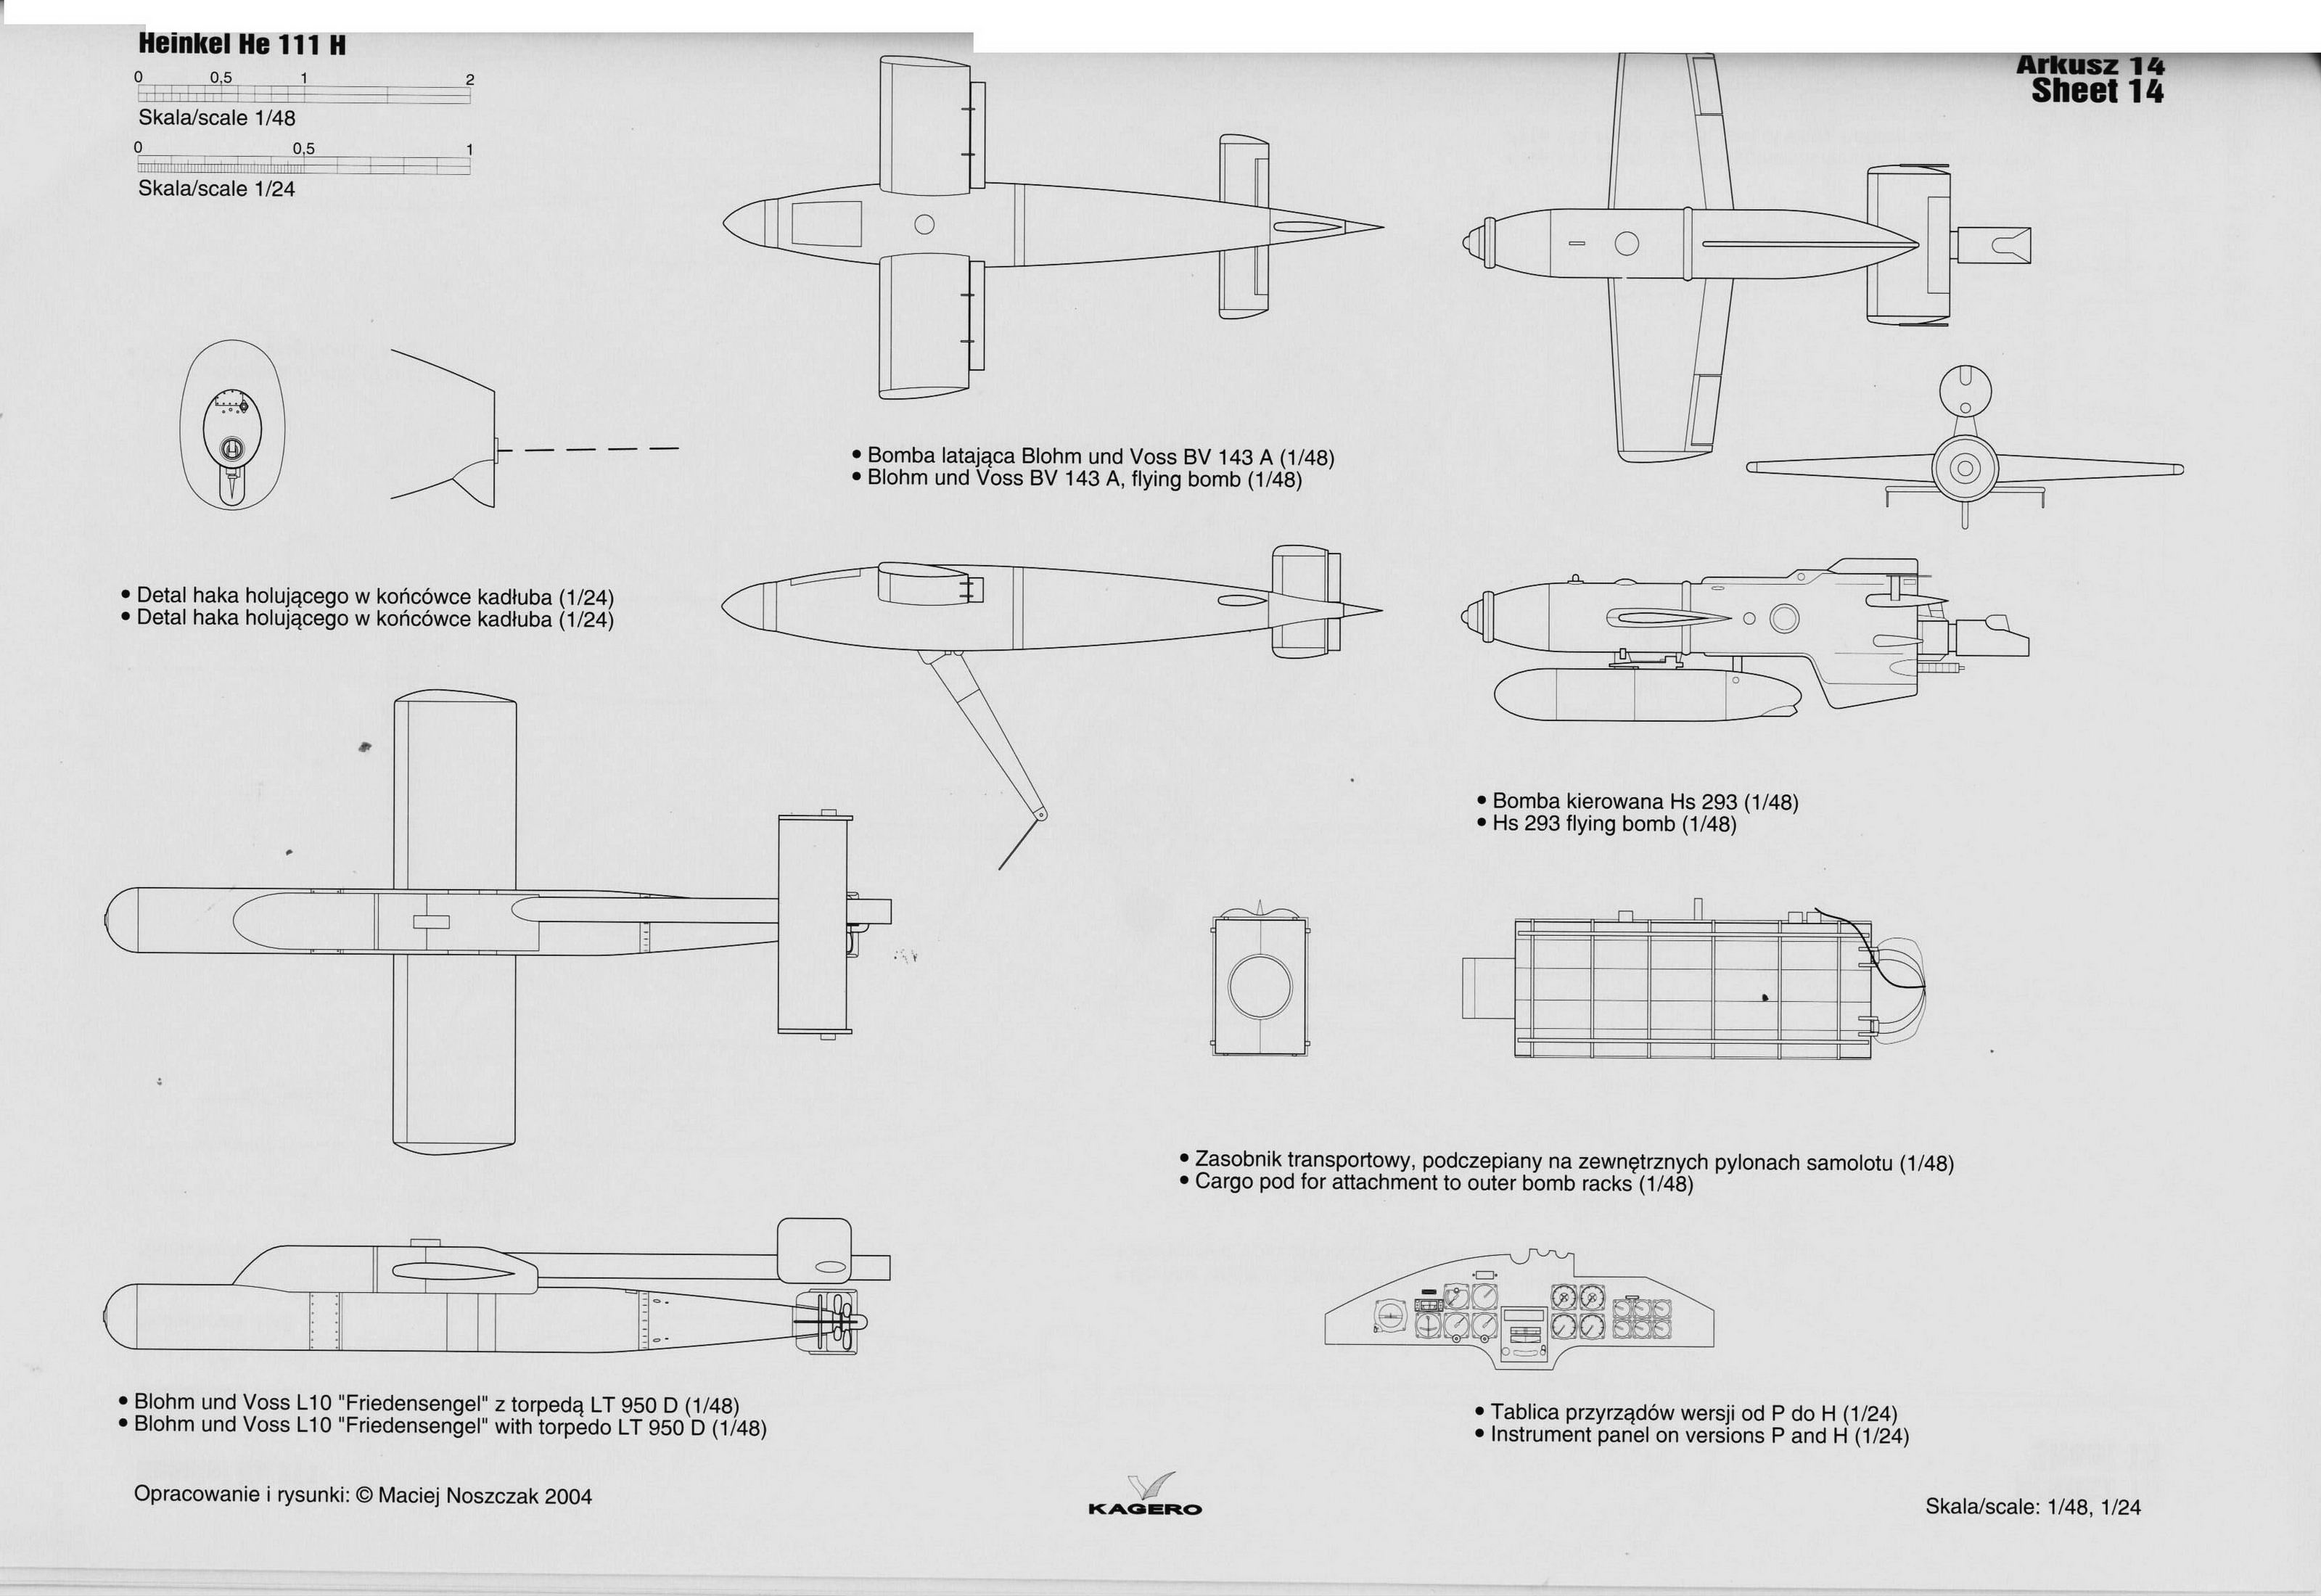 Artwork line drawing or blue print of a Heinkel He 111H HS 293 flying bomb scale 1 72 Arkusz 01